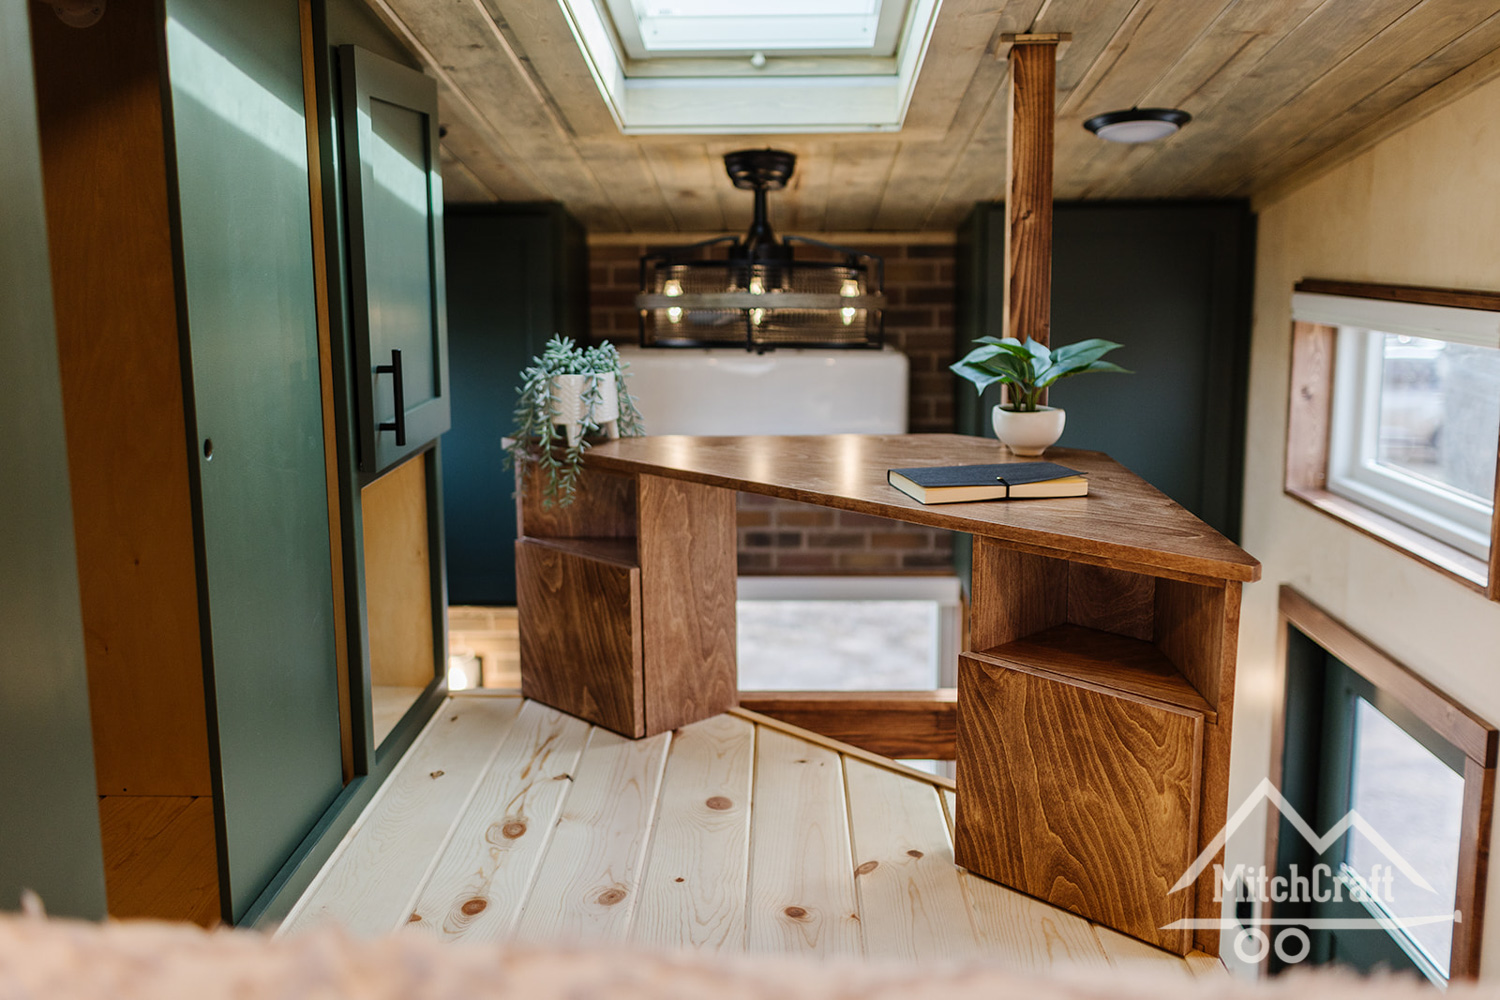 Home Office - Nicole's 16x8' Tiny House by MitchCraft Tiny Homes